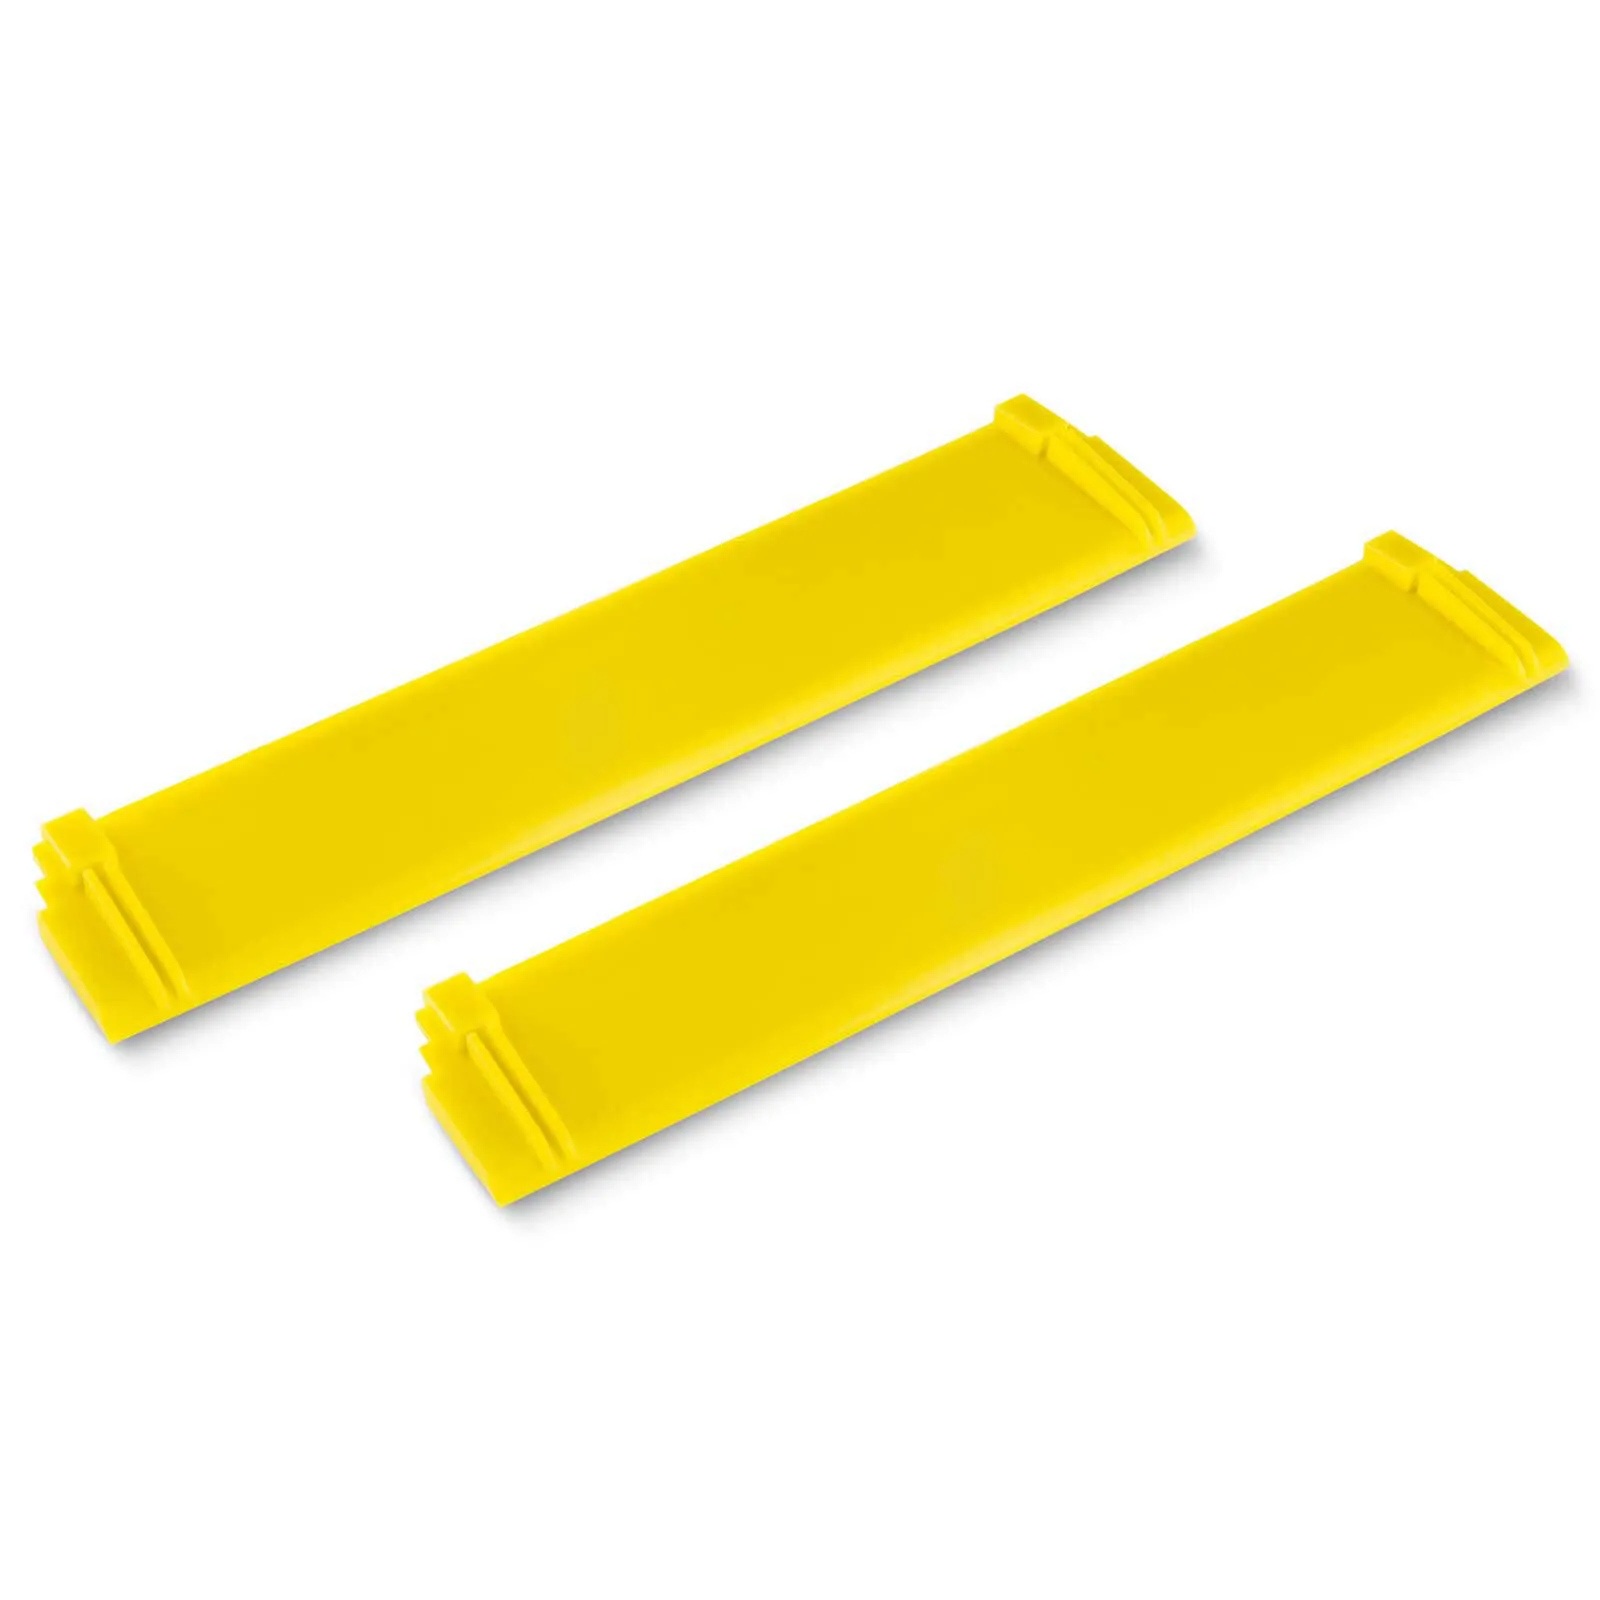 Karcher Suction Lips 170mm for WV 6 Window Vacs - Pack of 2